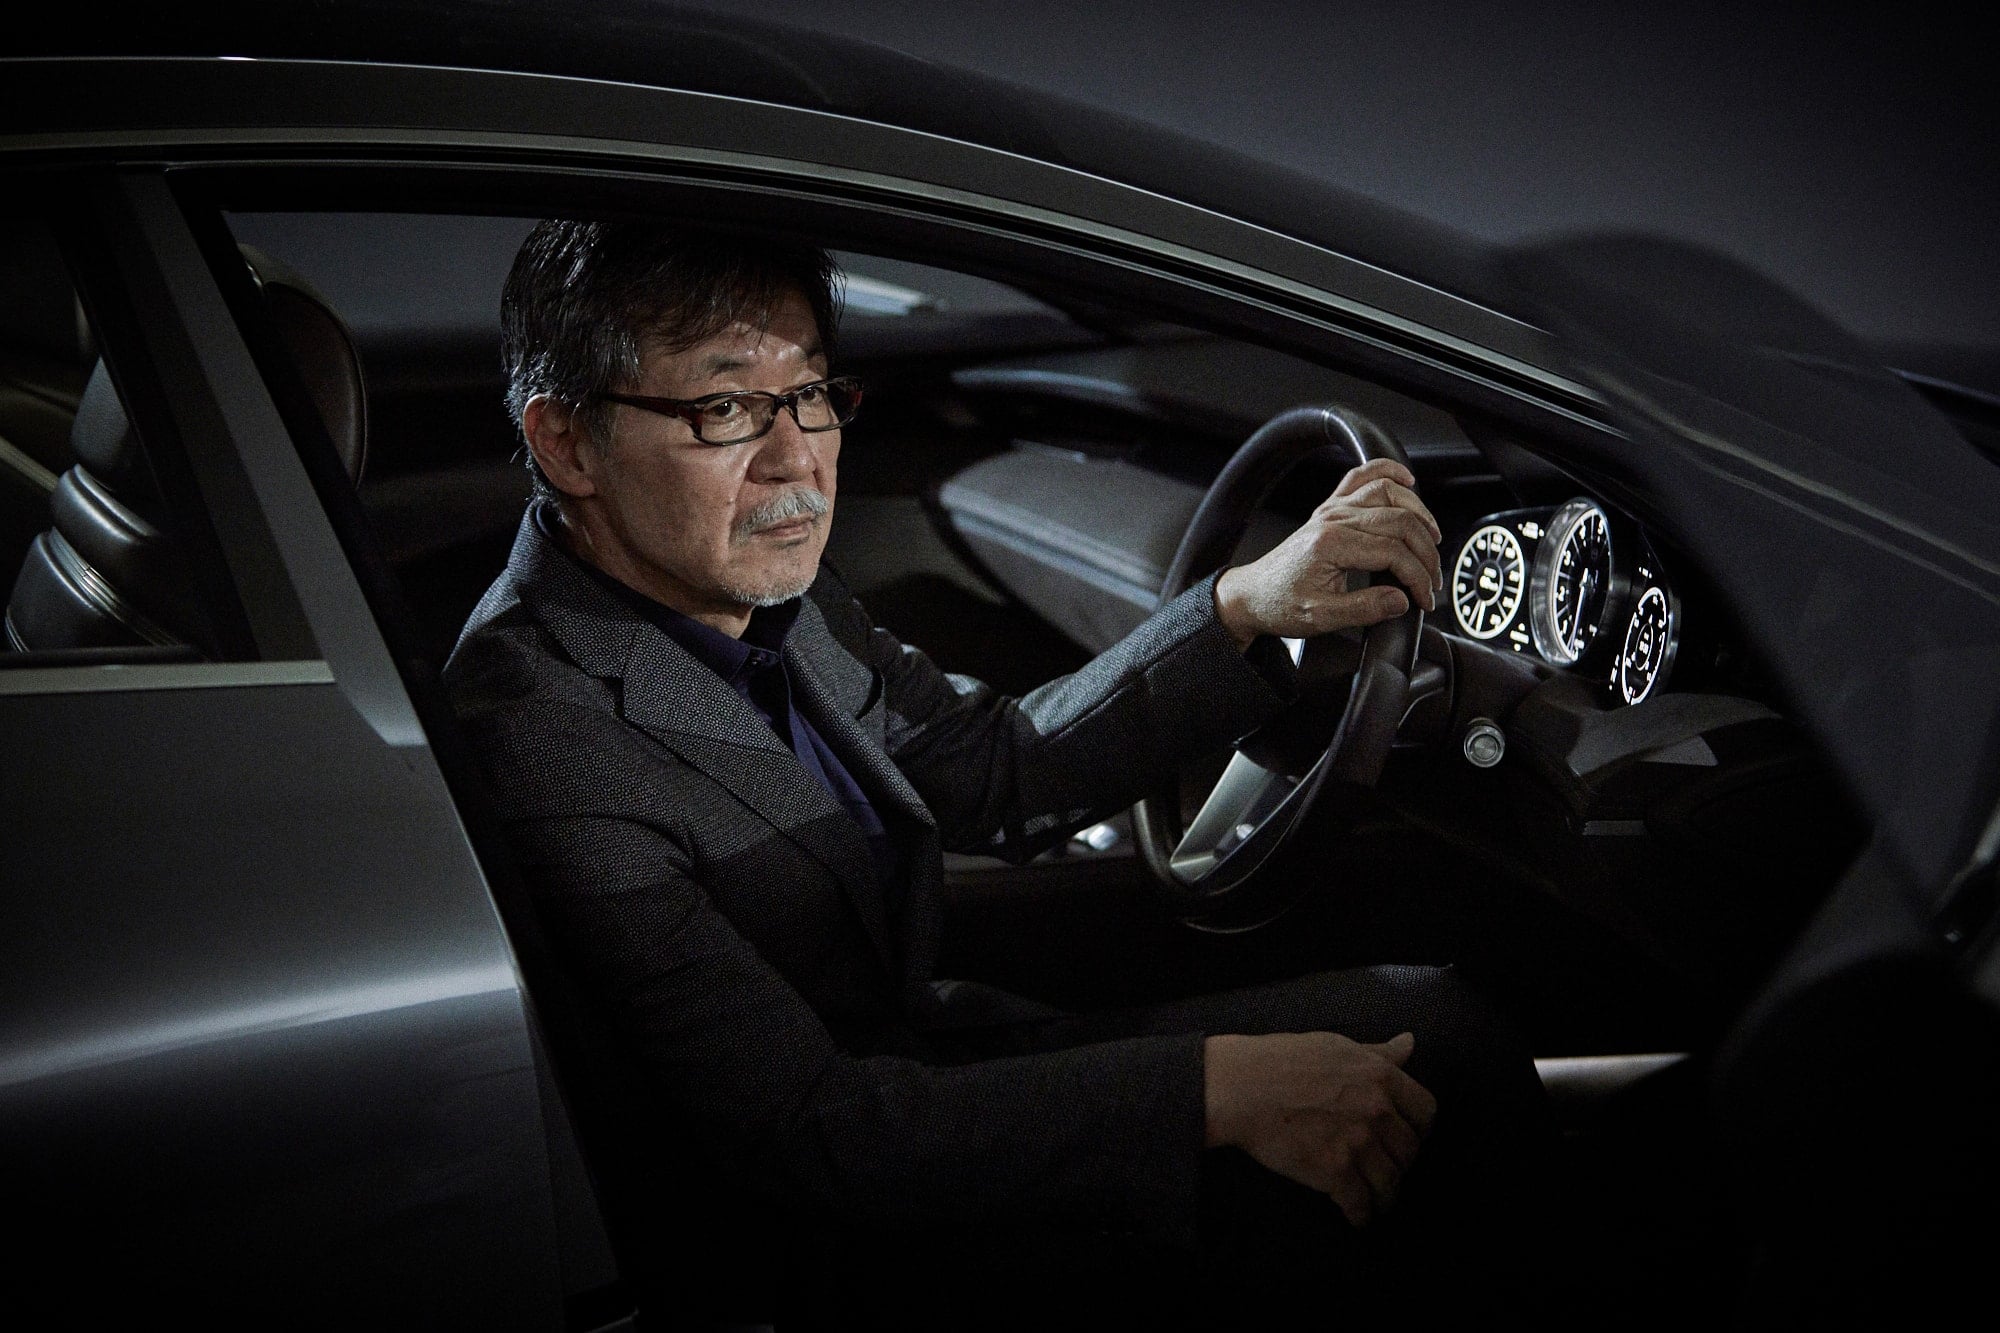 In 2020, Mazda will be marking their 100 year anniversary. “I see 100 years as a benchmark, and I will like to present what we can propose for the next 100 years through design”, says Maeda. During his days off, Maeda often join races. He continues to search for the fascination of cars.